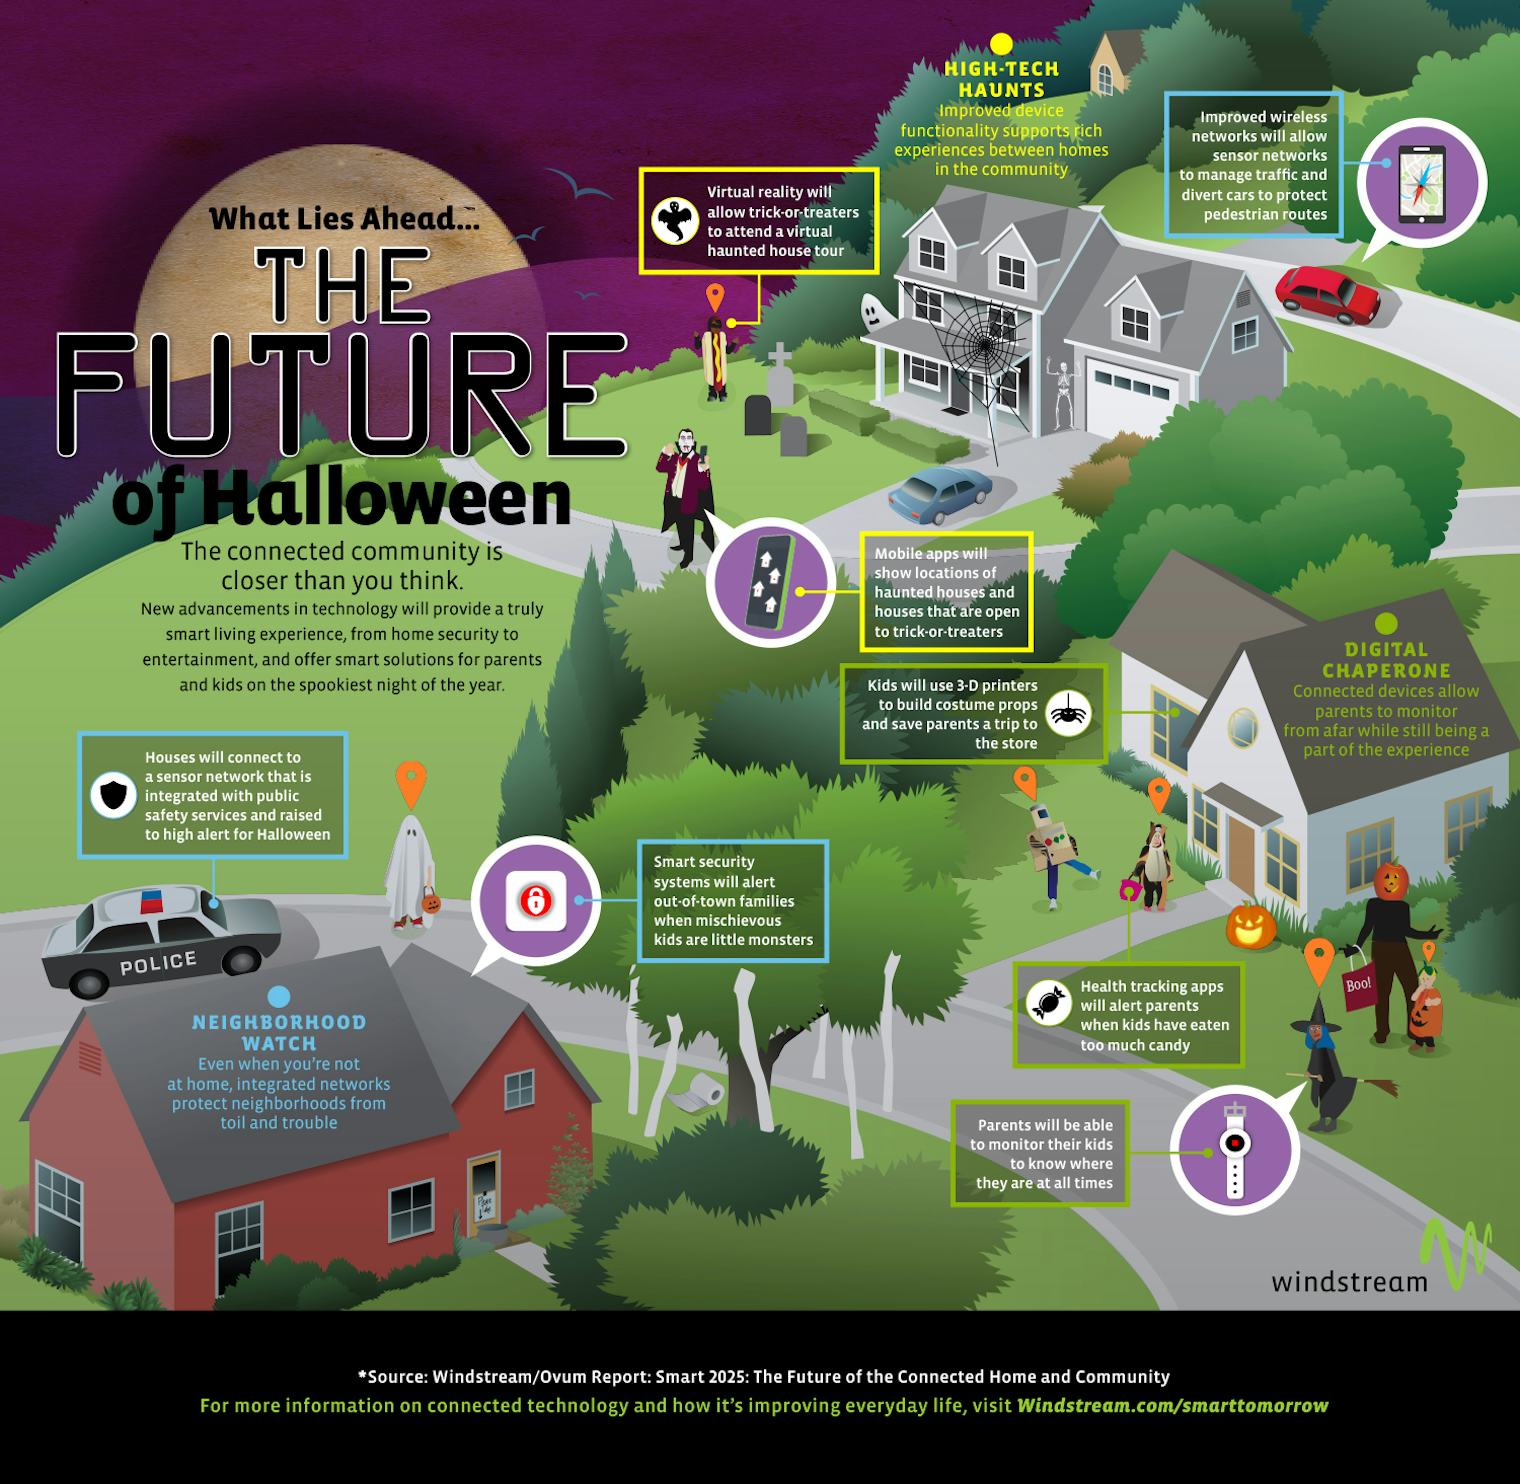 The Future Of Halloween Will Be Hella Different By 2025, According To